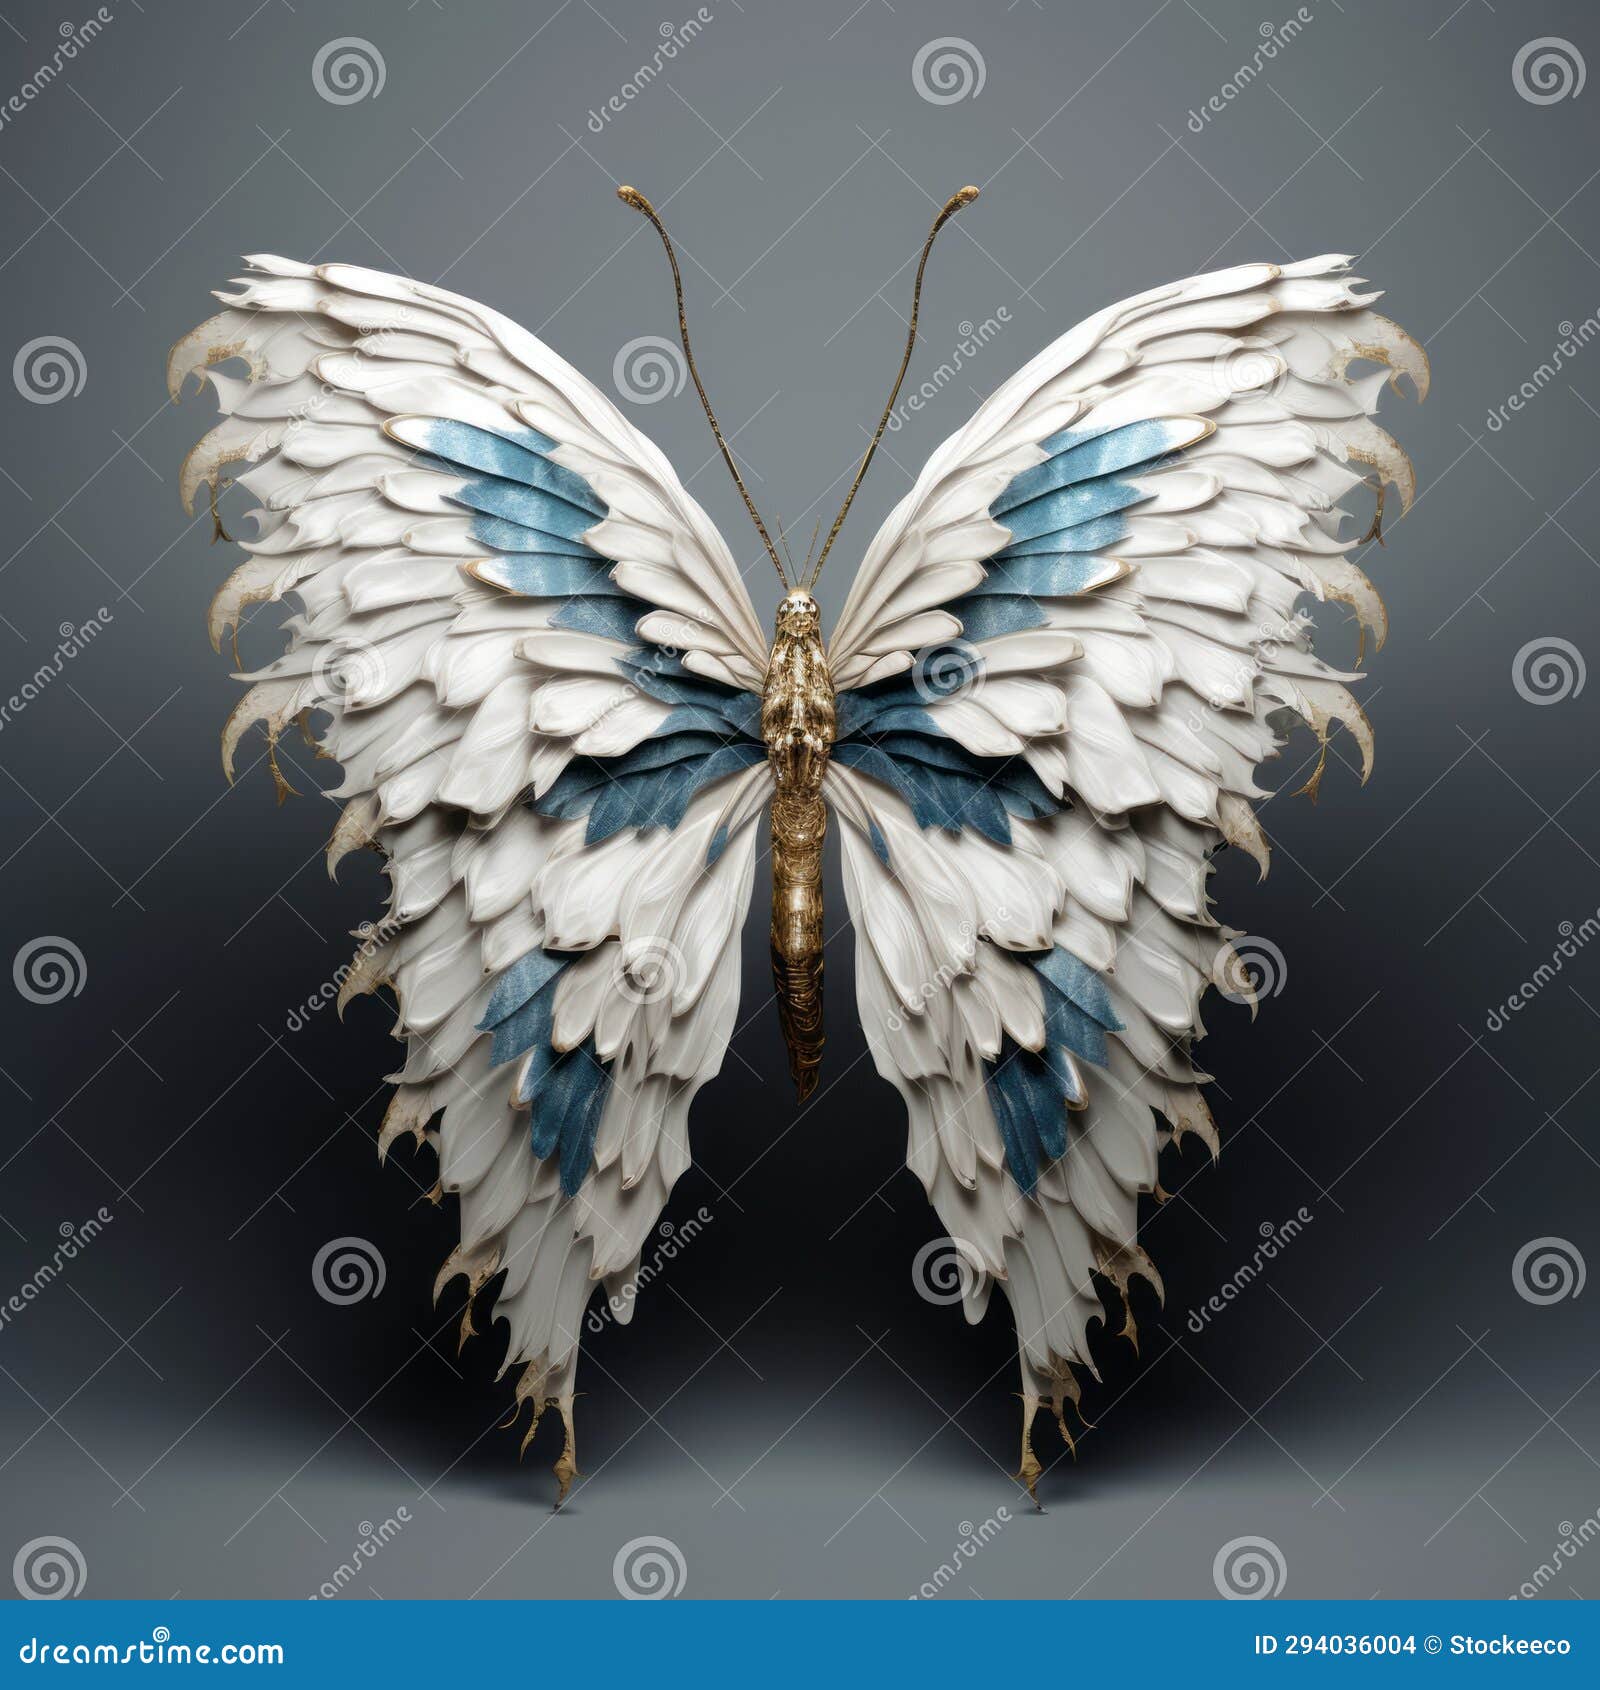 3d rendering of decorative butterfly with blue wings